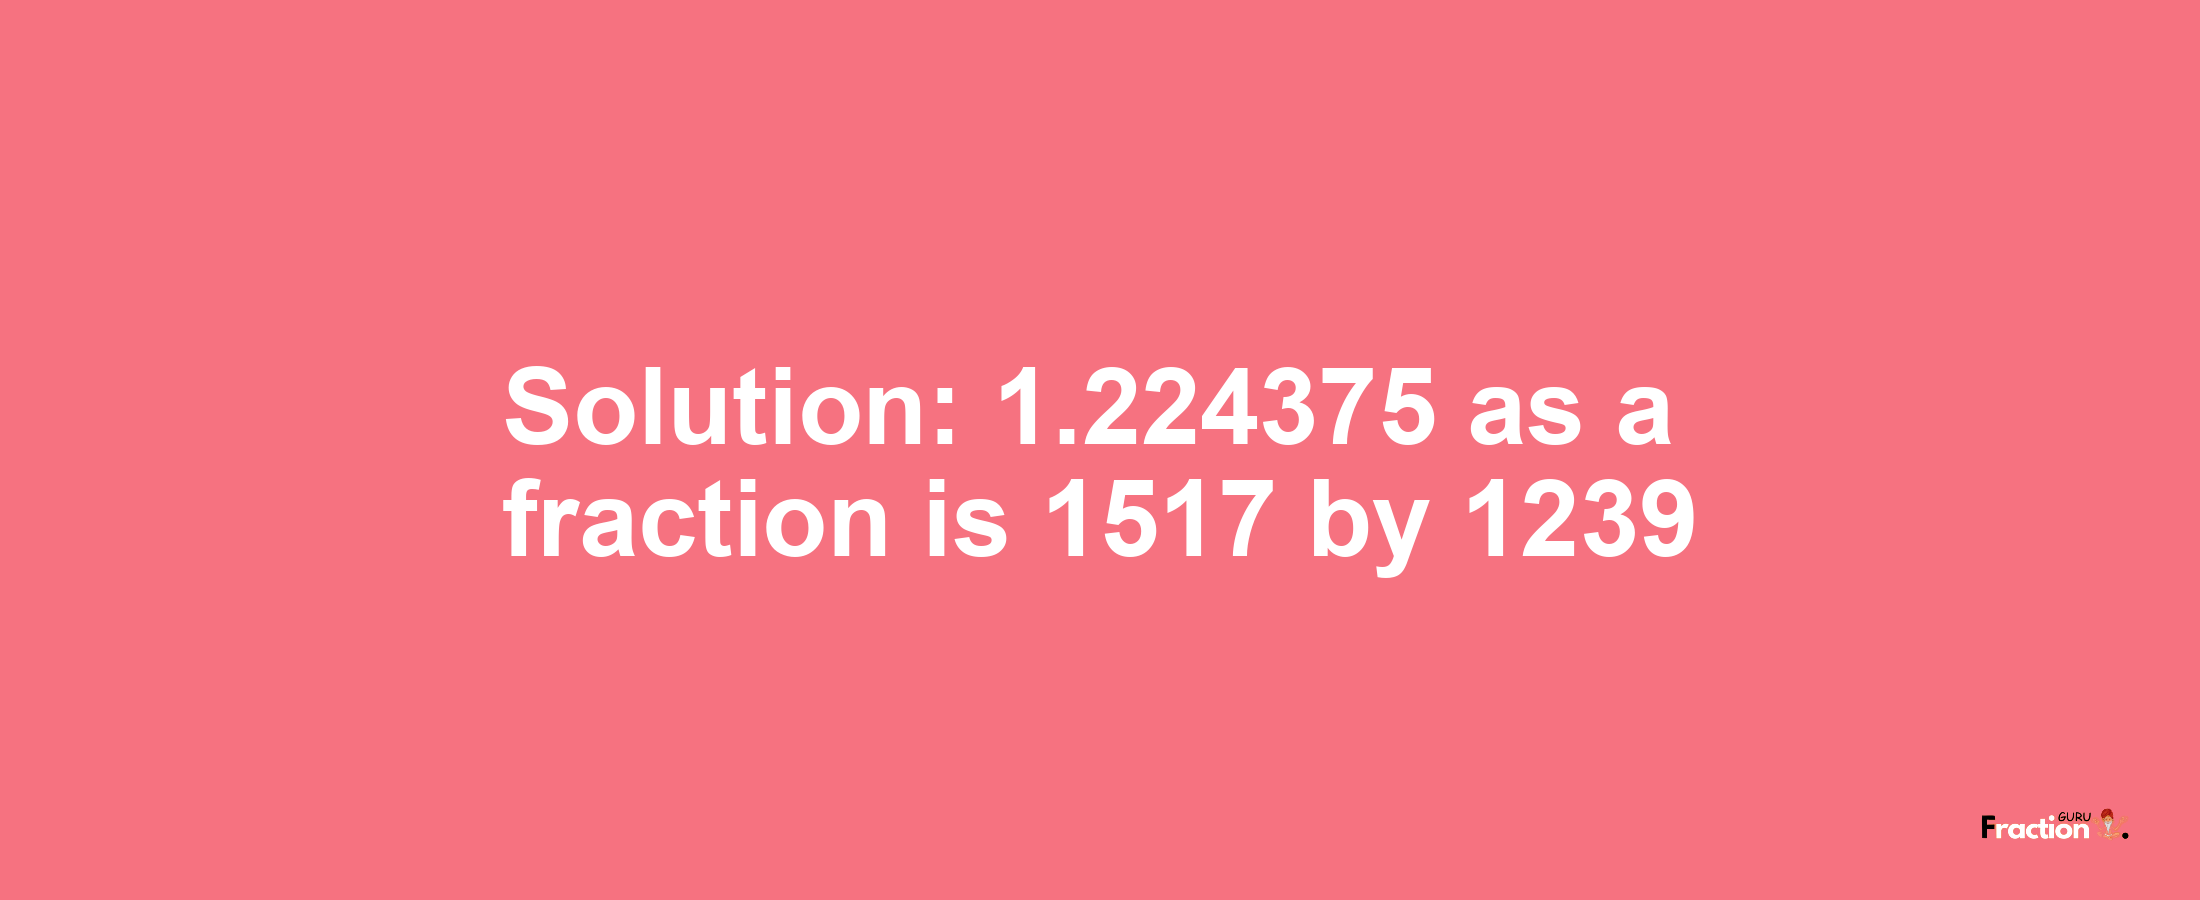 Solution:1.224375 as a fraction is 1517/1239